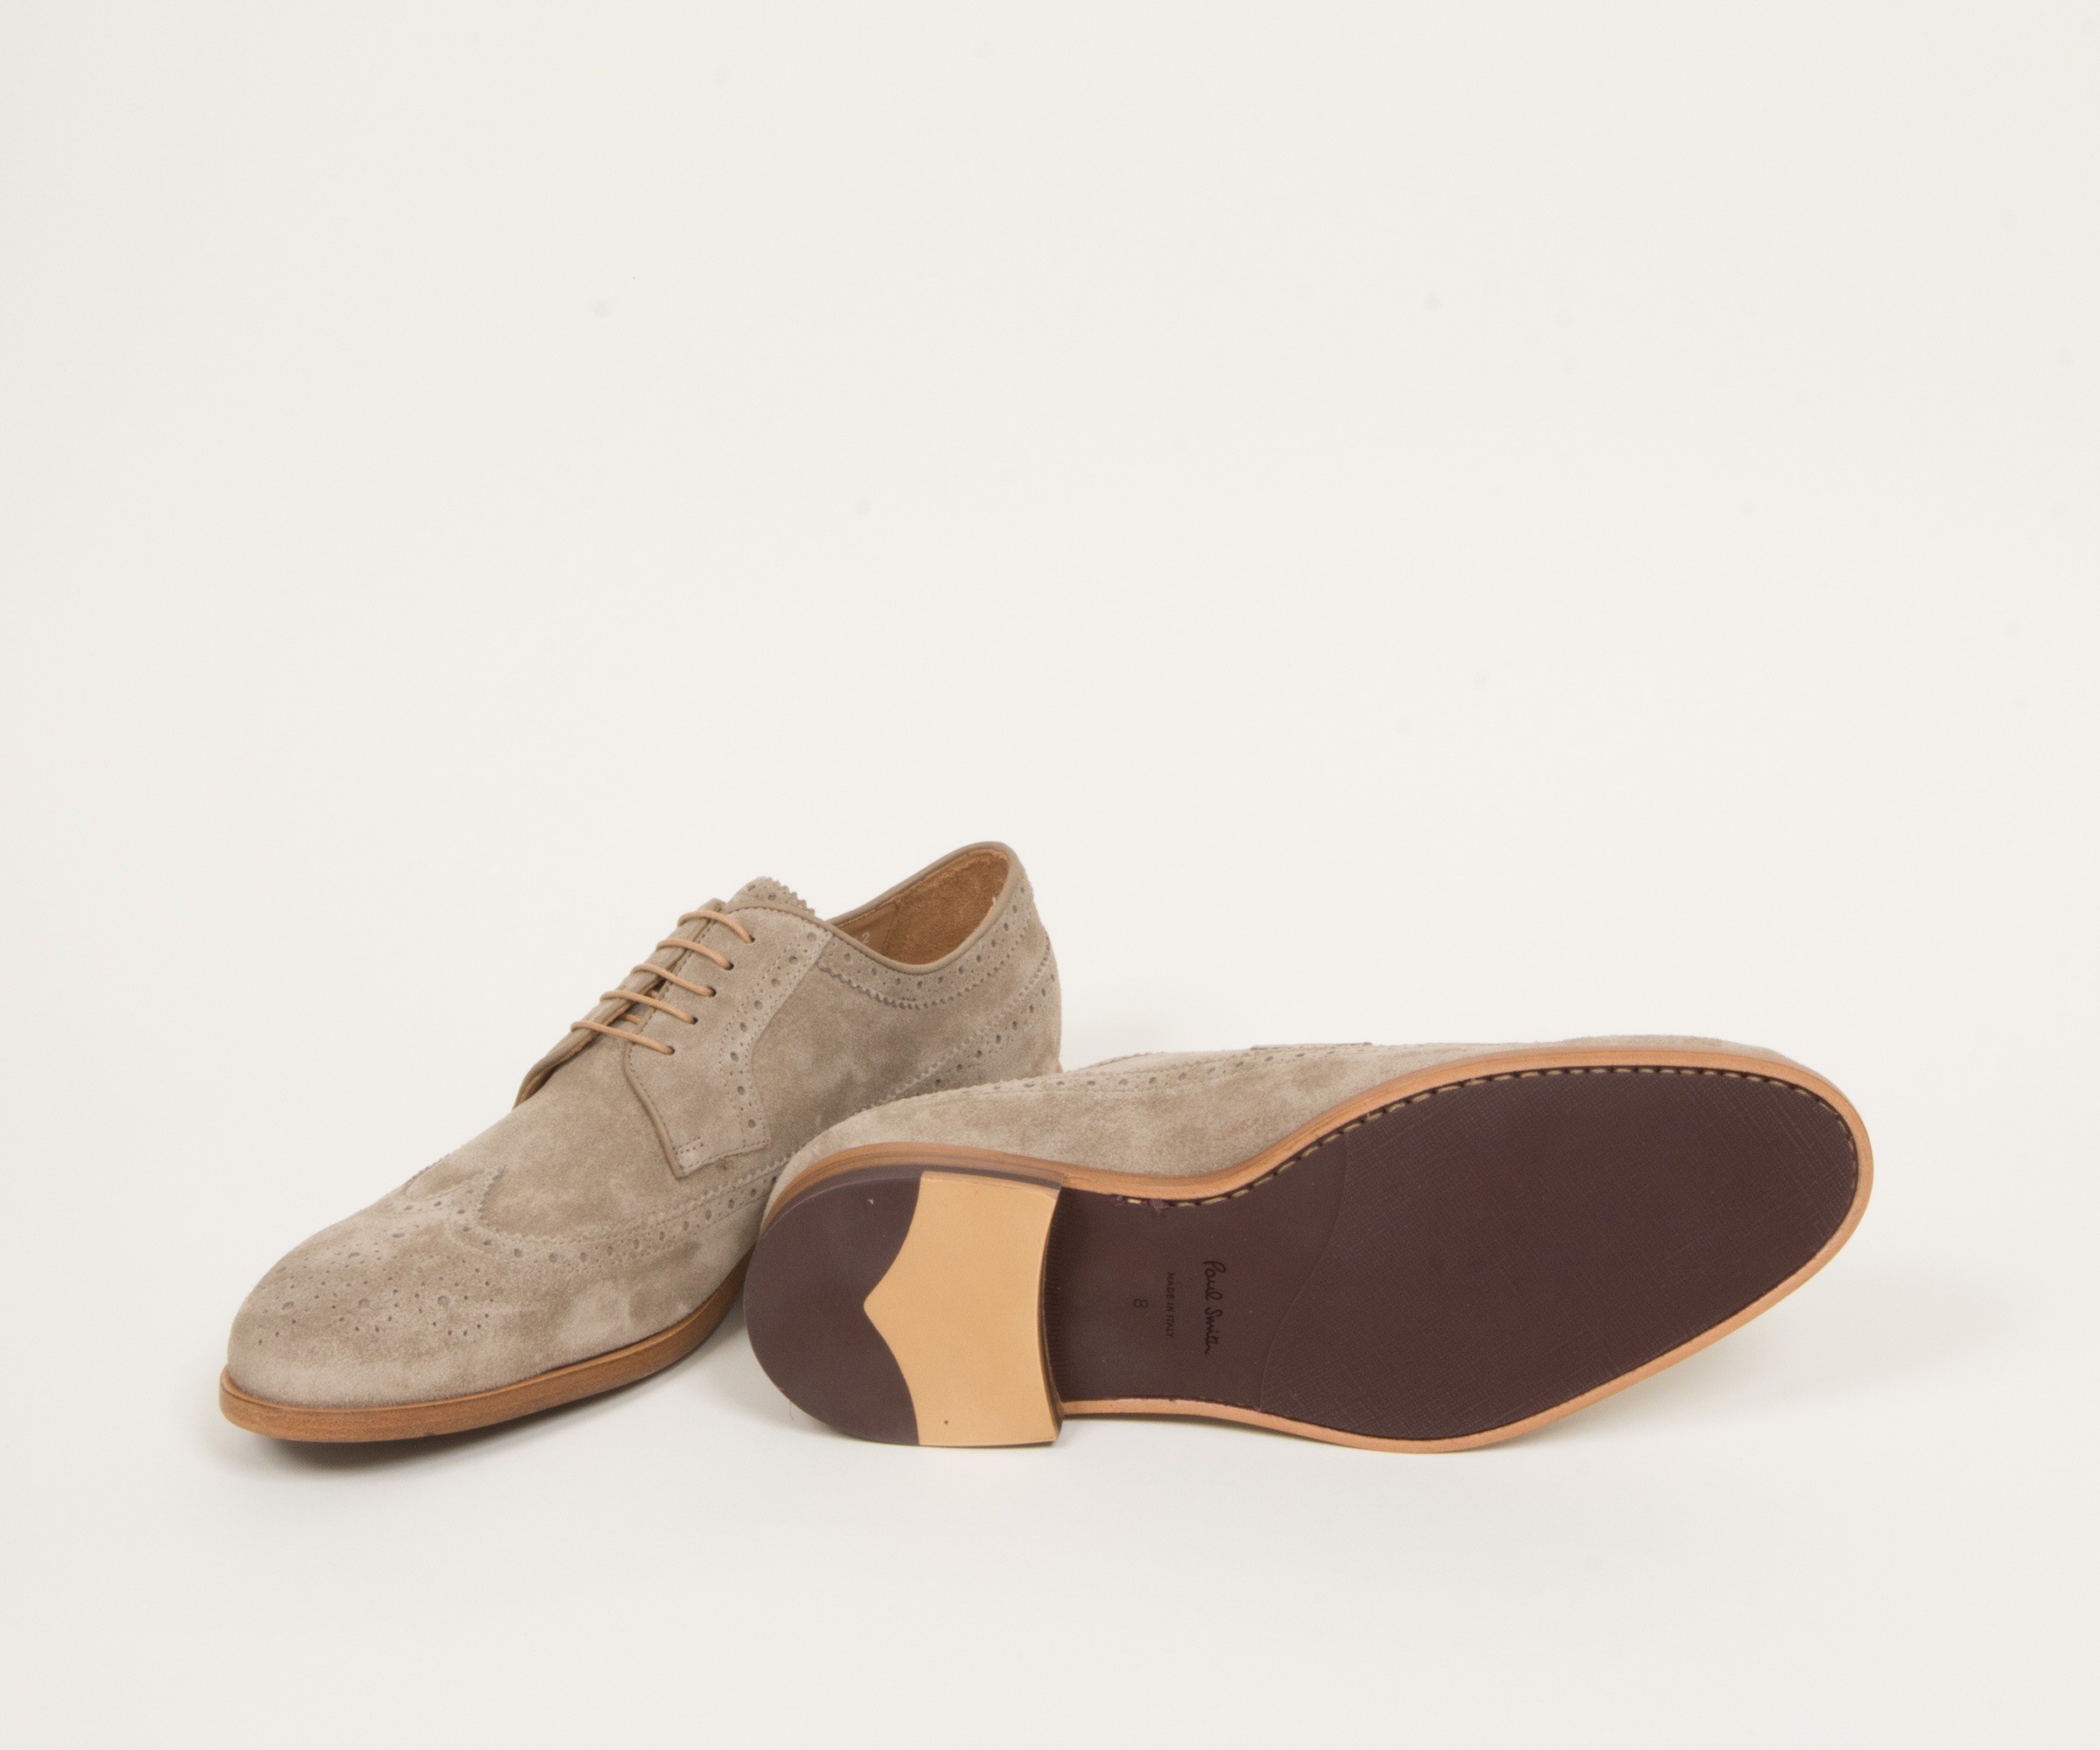 Paul Smith Shoes 'Talbot' Suede Brogue Beige